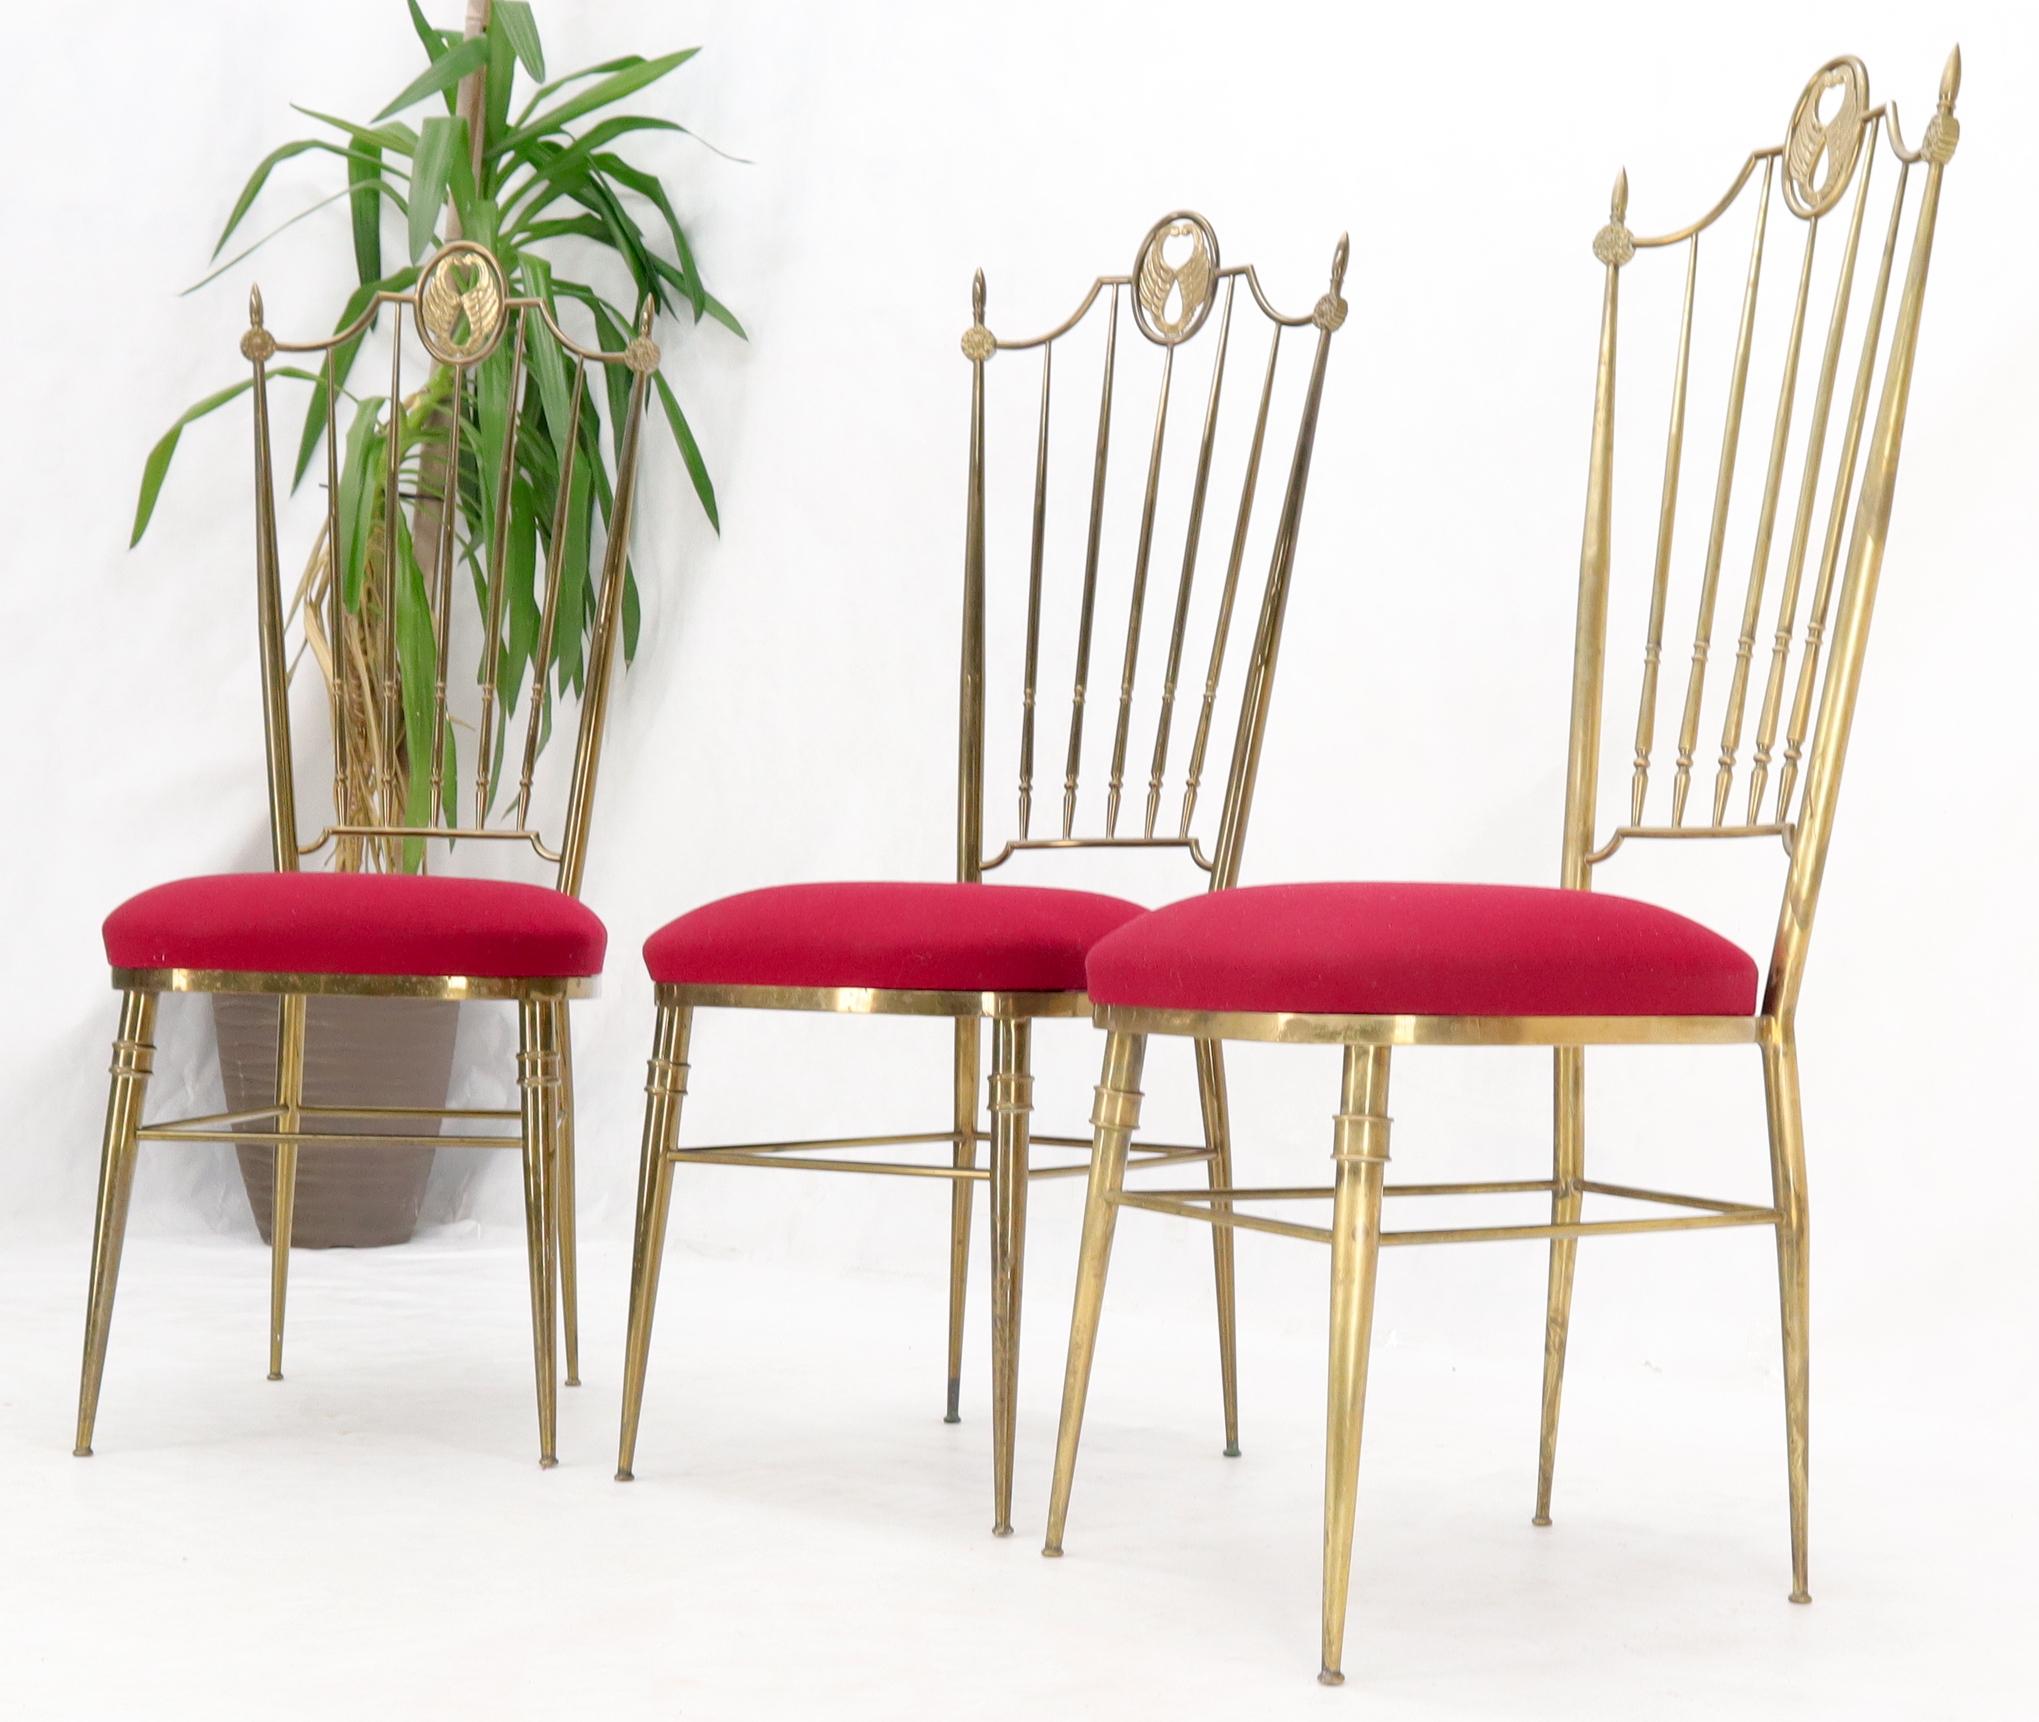 20th Century Set of 3 Italian Solid Brass Chiavari Chairs From 1950s New Upholstery For Sale